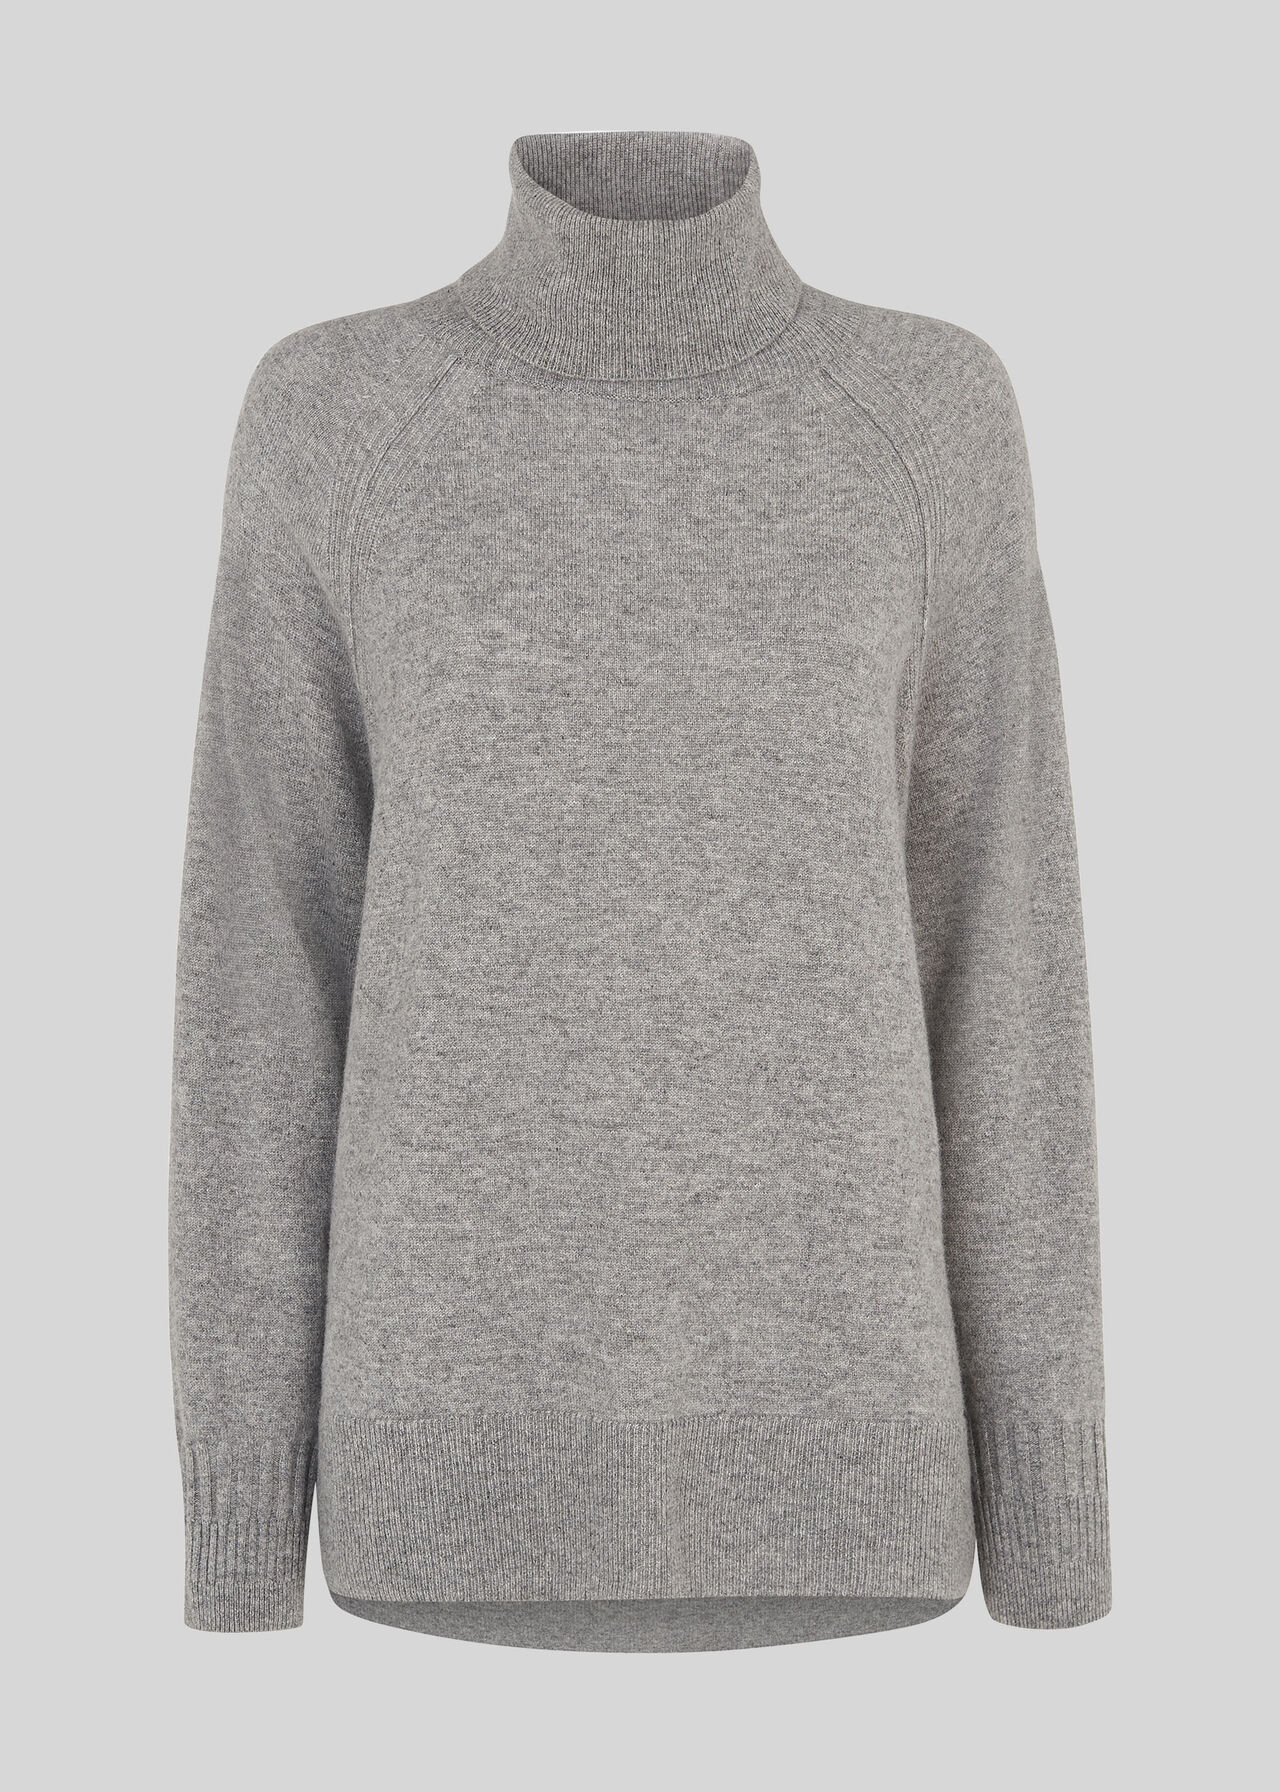 Cashmere Roll Neck Sweater Grey